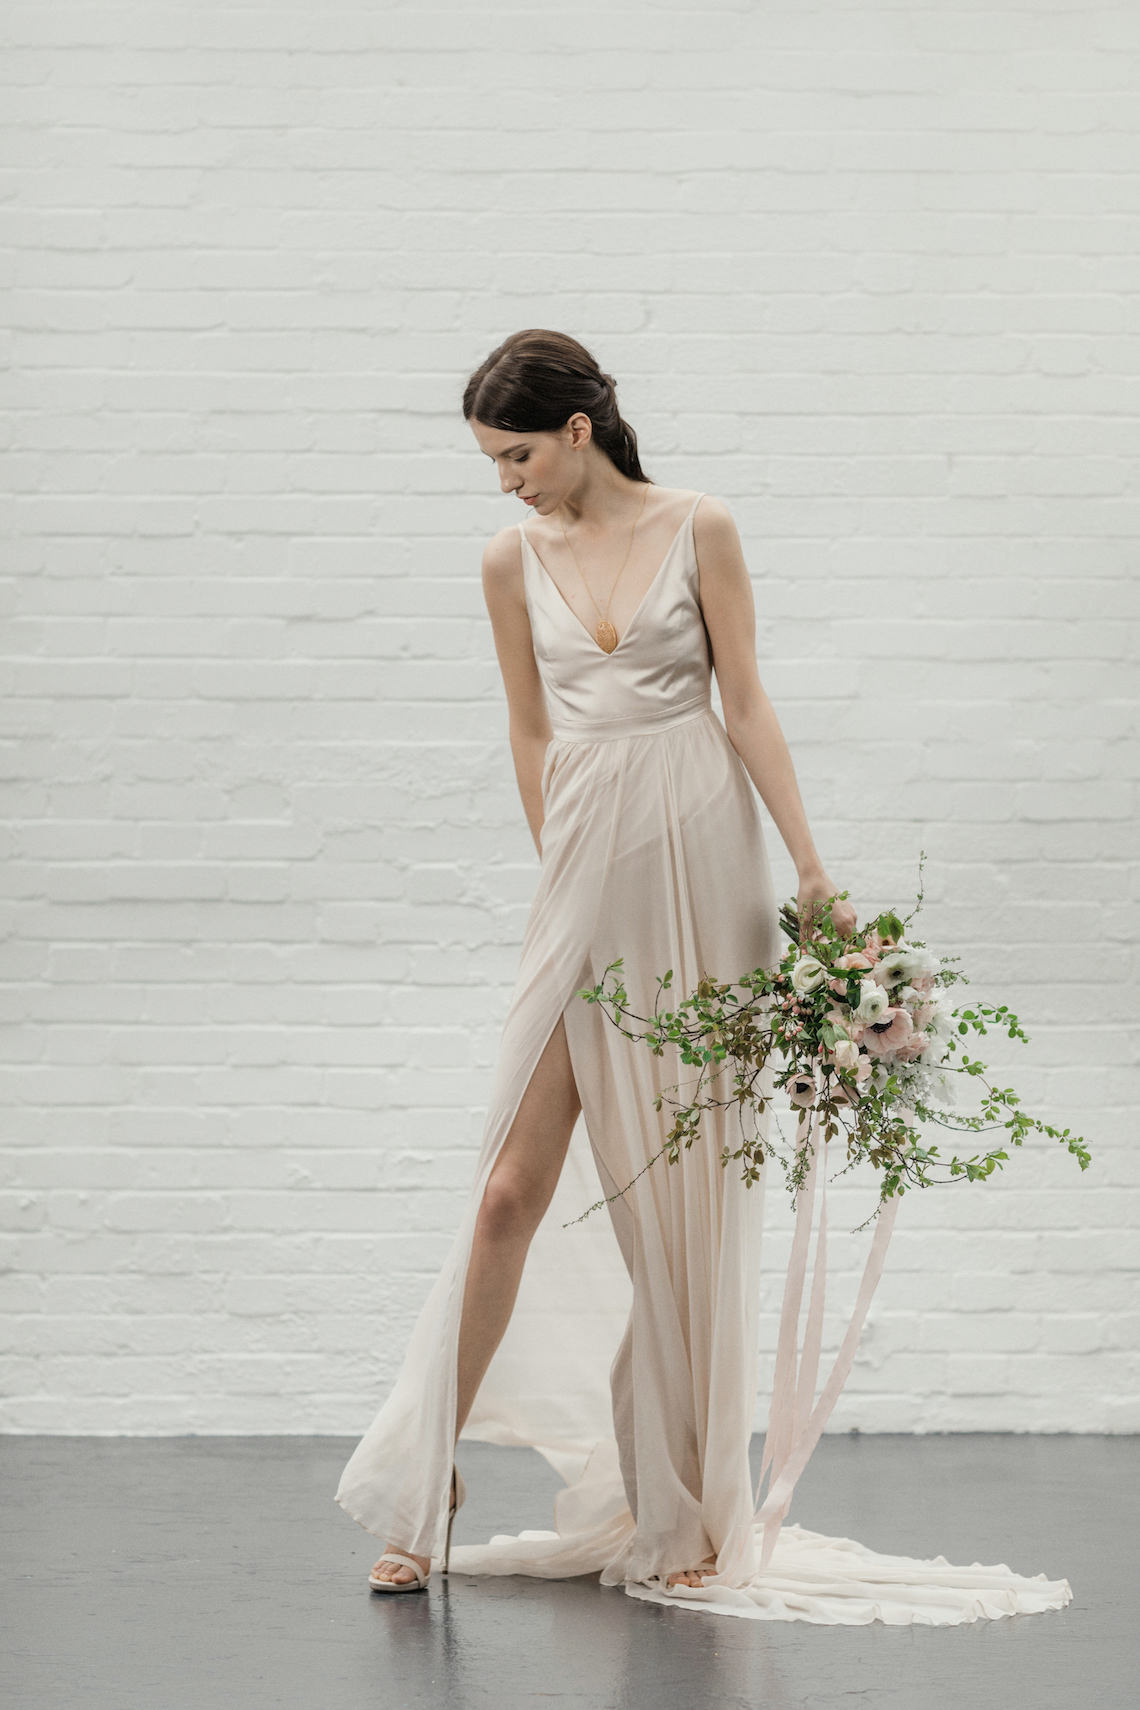 Modern Minimalist Styled Shoot Featuring Gowns For The Natural Bride | Cinzia Bruschini 12